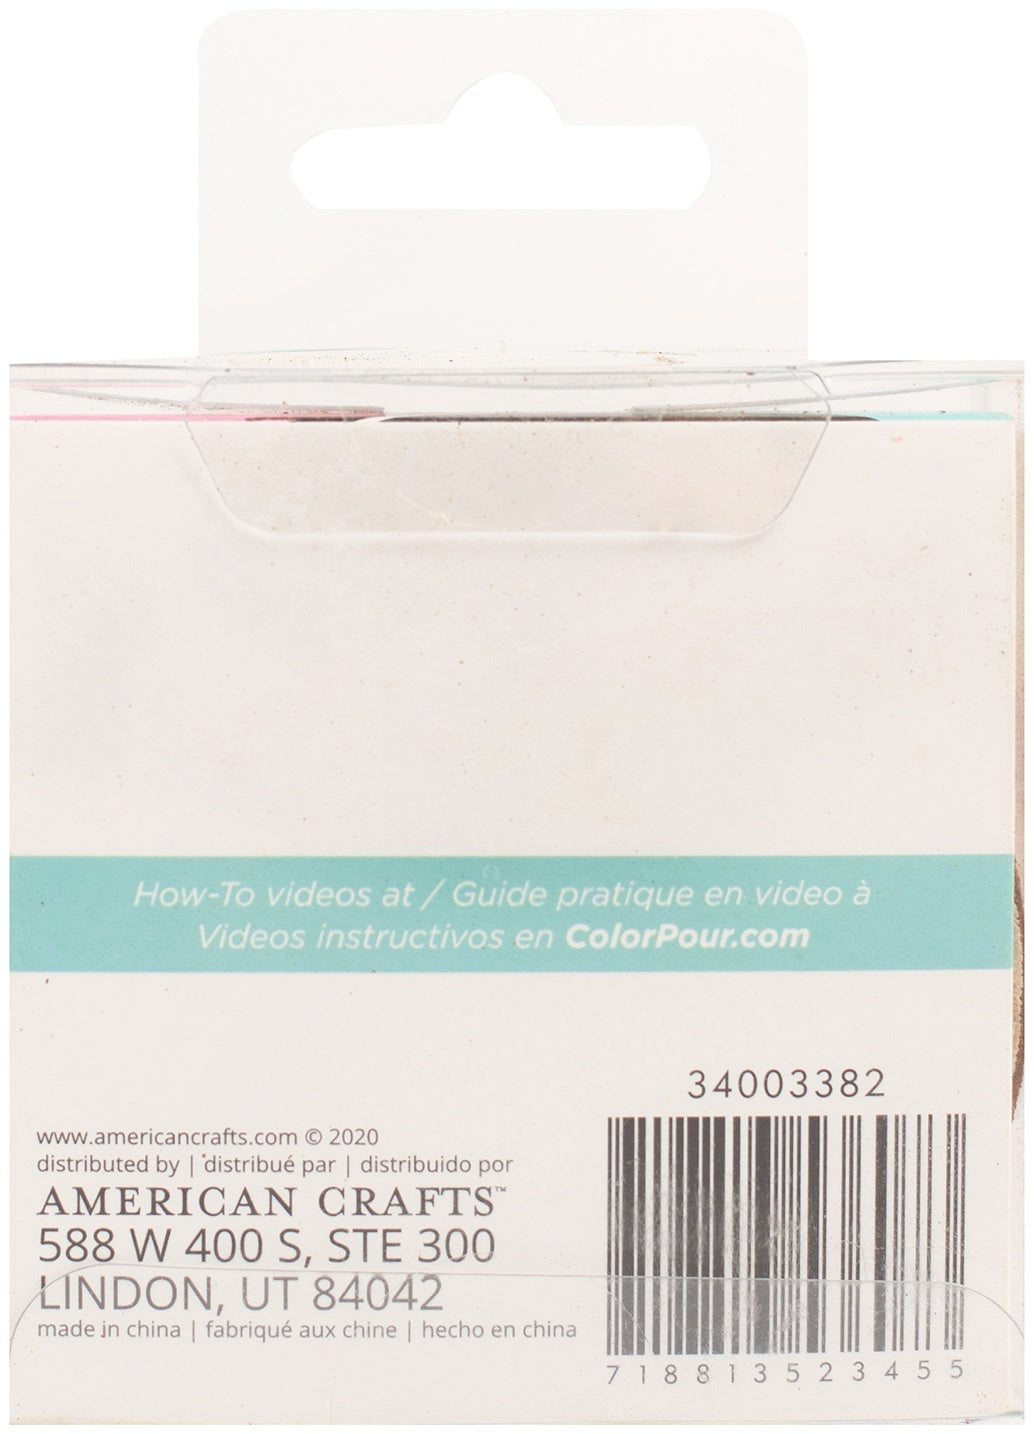 American Crafts Color Pour Resin Coasters 10/Pkg-Natural Variety Pack